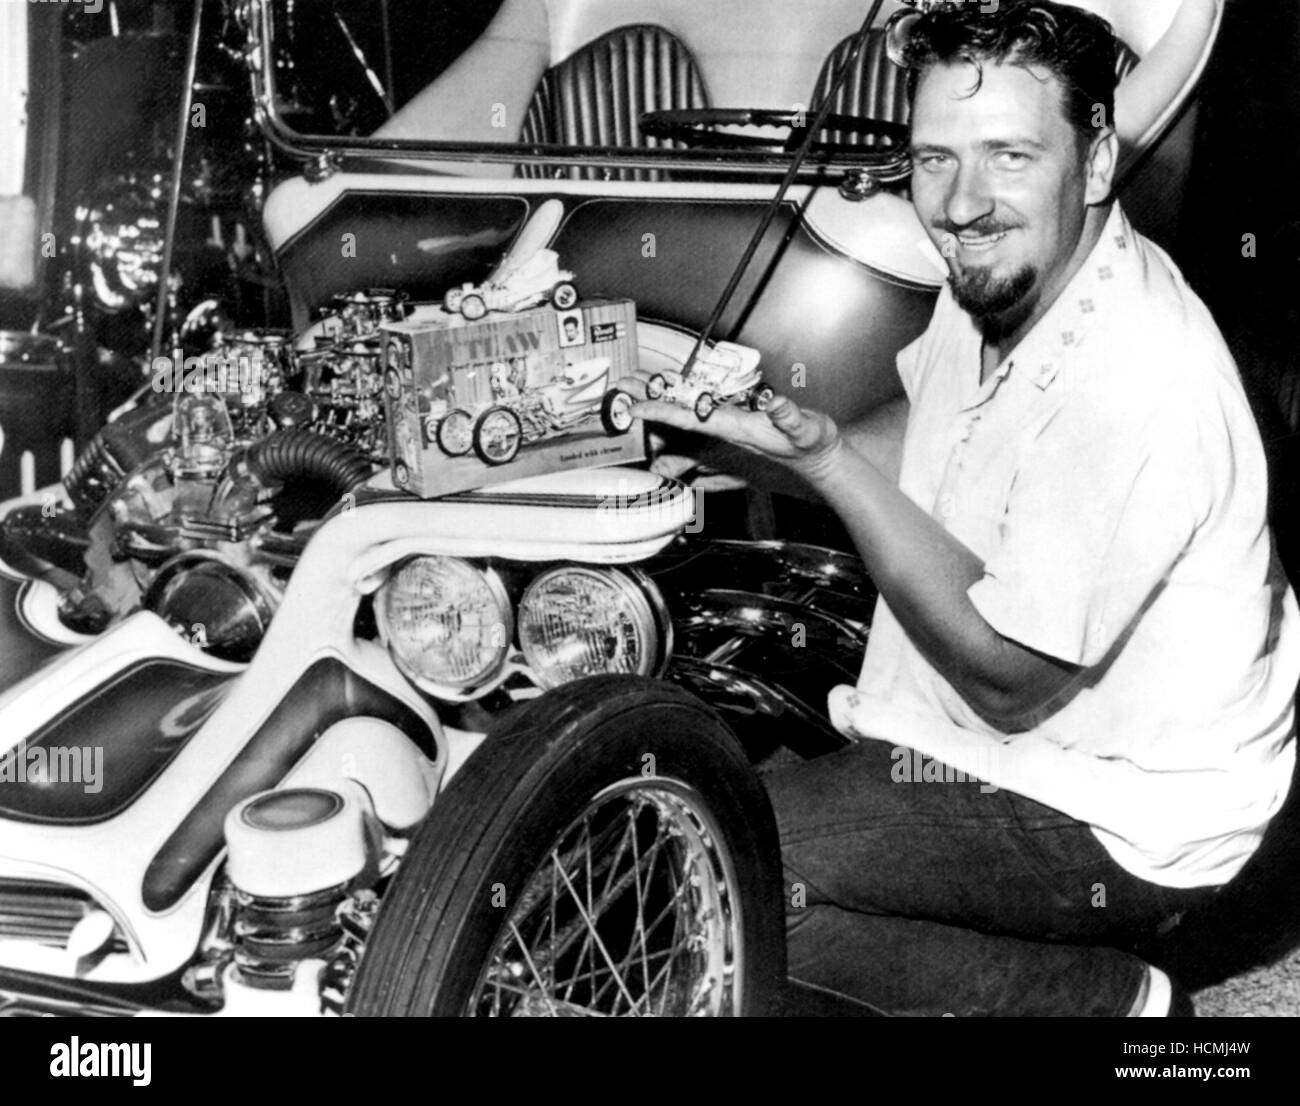 TALES OF THE RAT FINK, Ed 'Big Daddy' Roth, 2006. ©Abramorama Inc./Courtesy Everett Collection Stock Photo